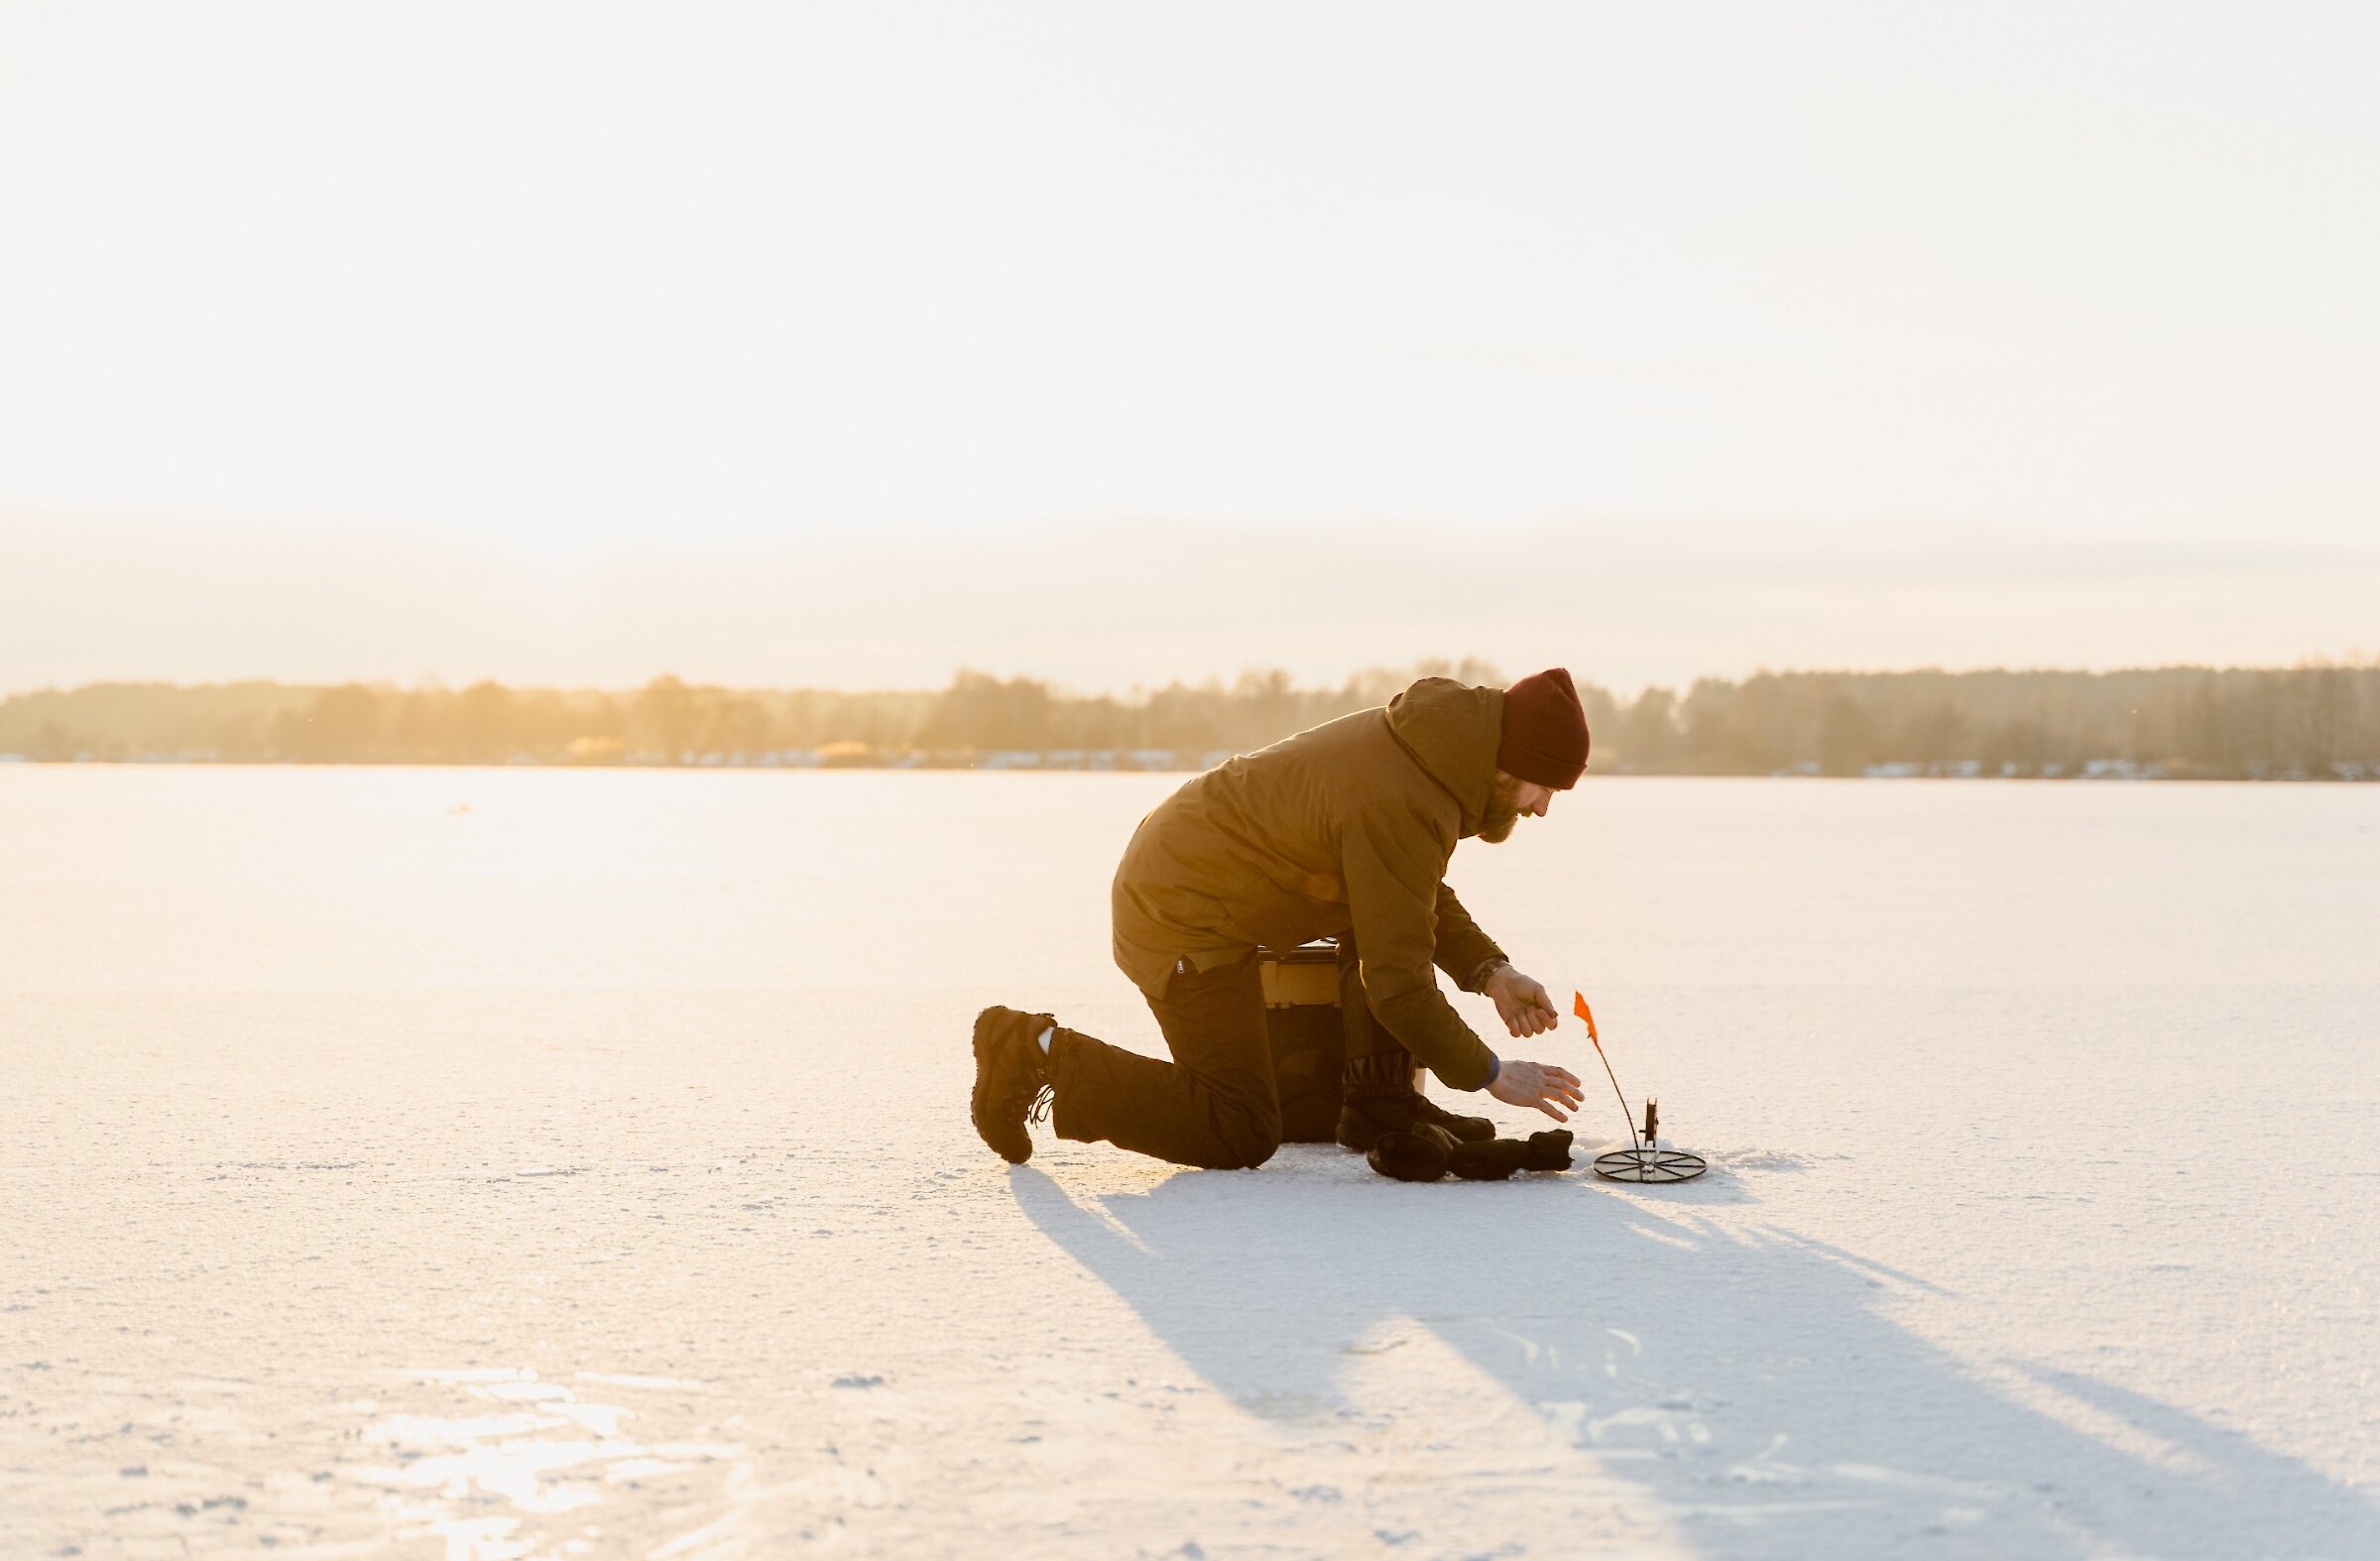 Ice fishing in front of the estate